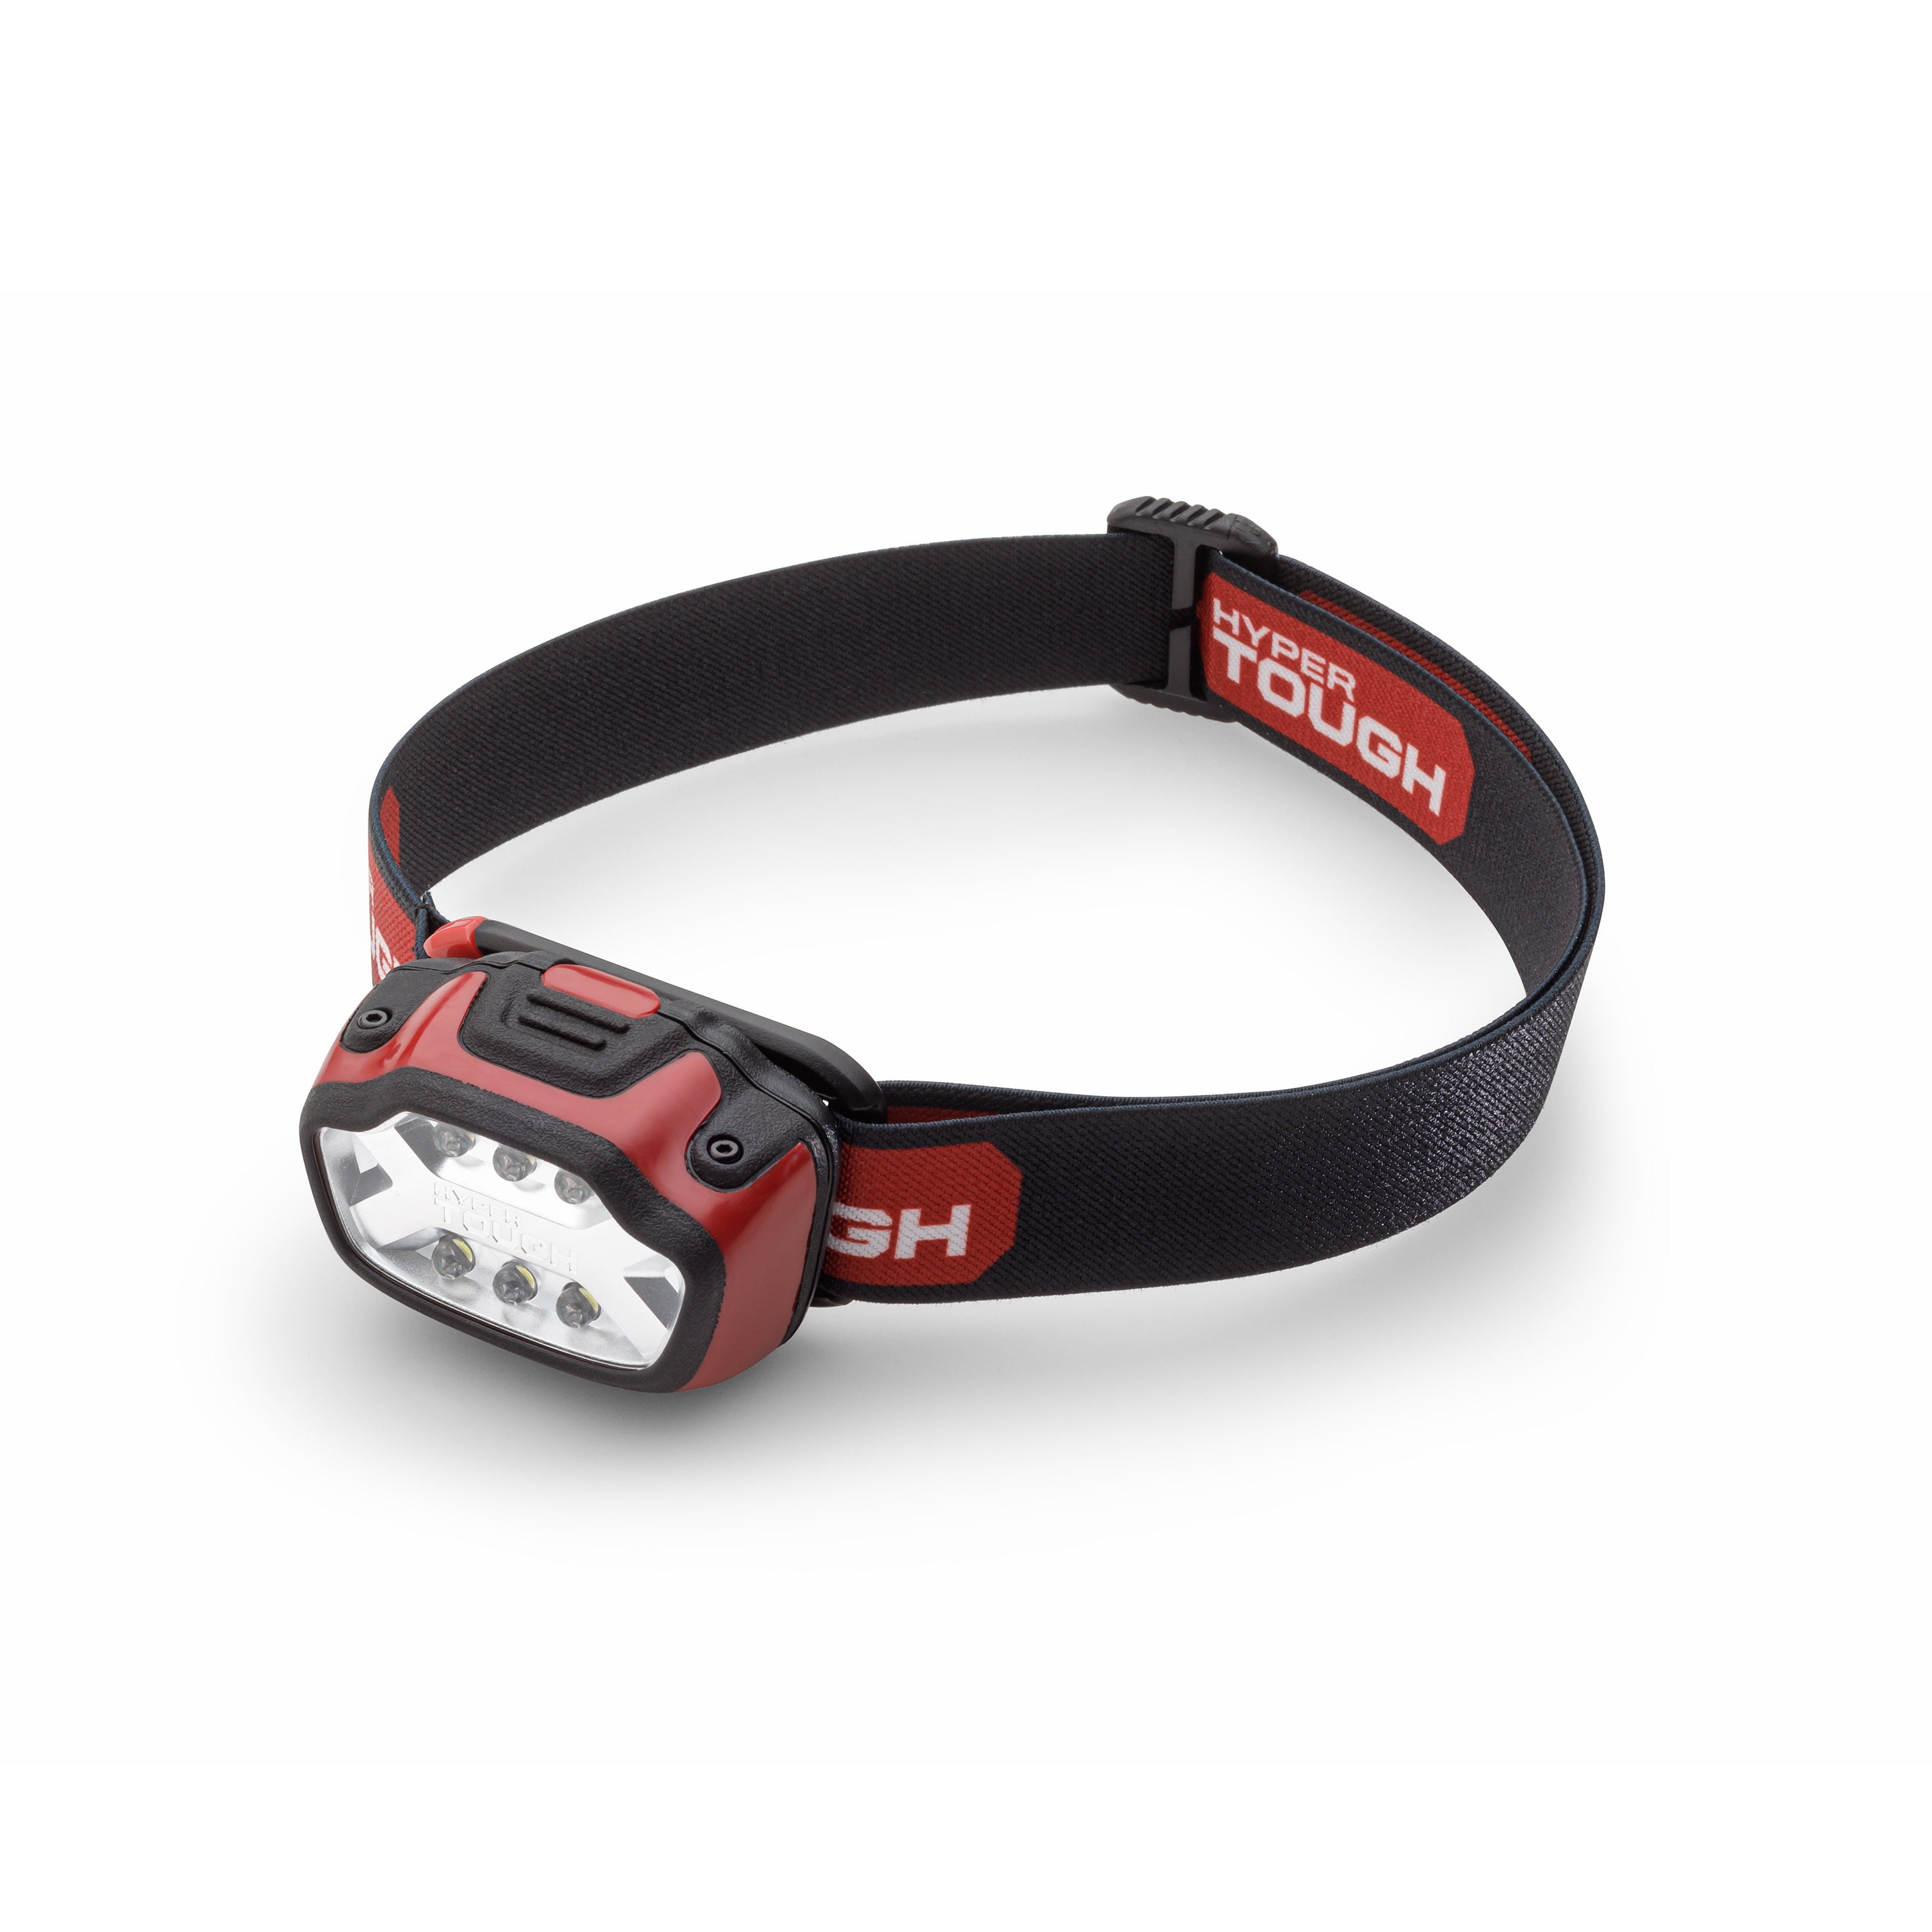 Hyper Tough LED 150 Lumens Headlamp (3 AAA Batteries Included)